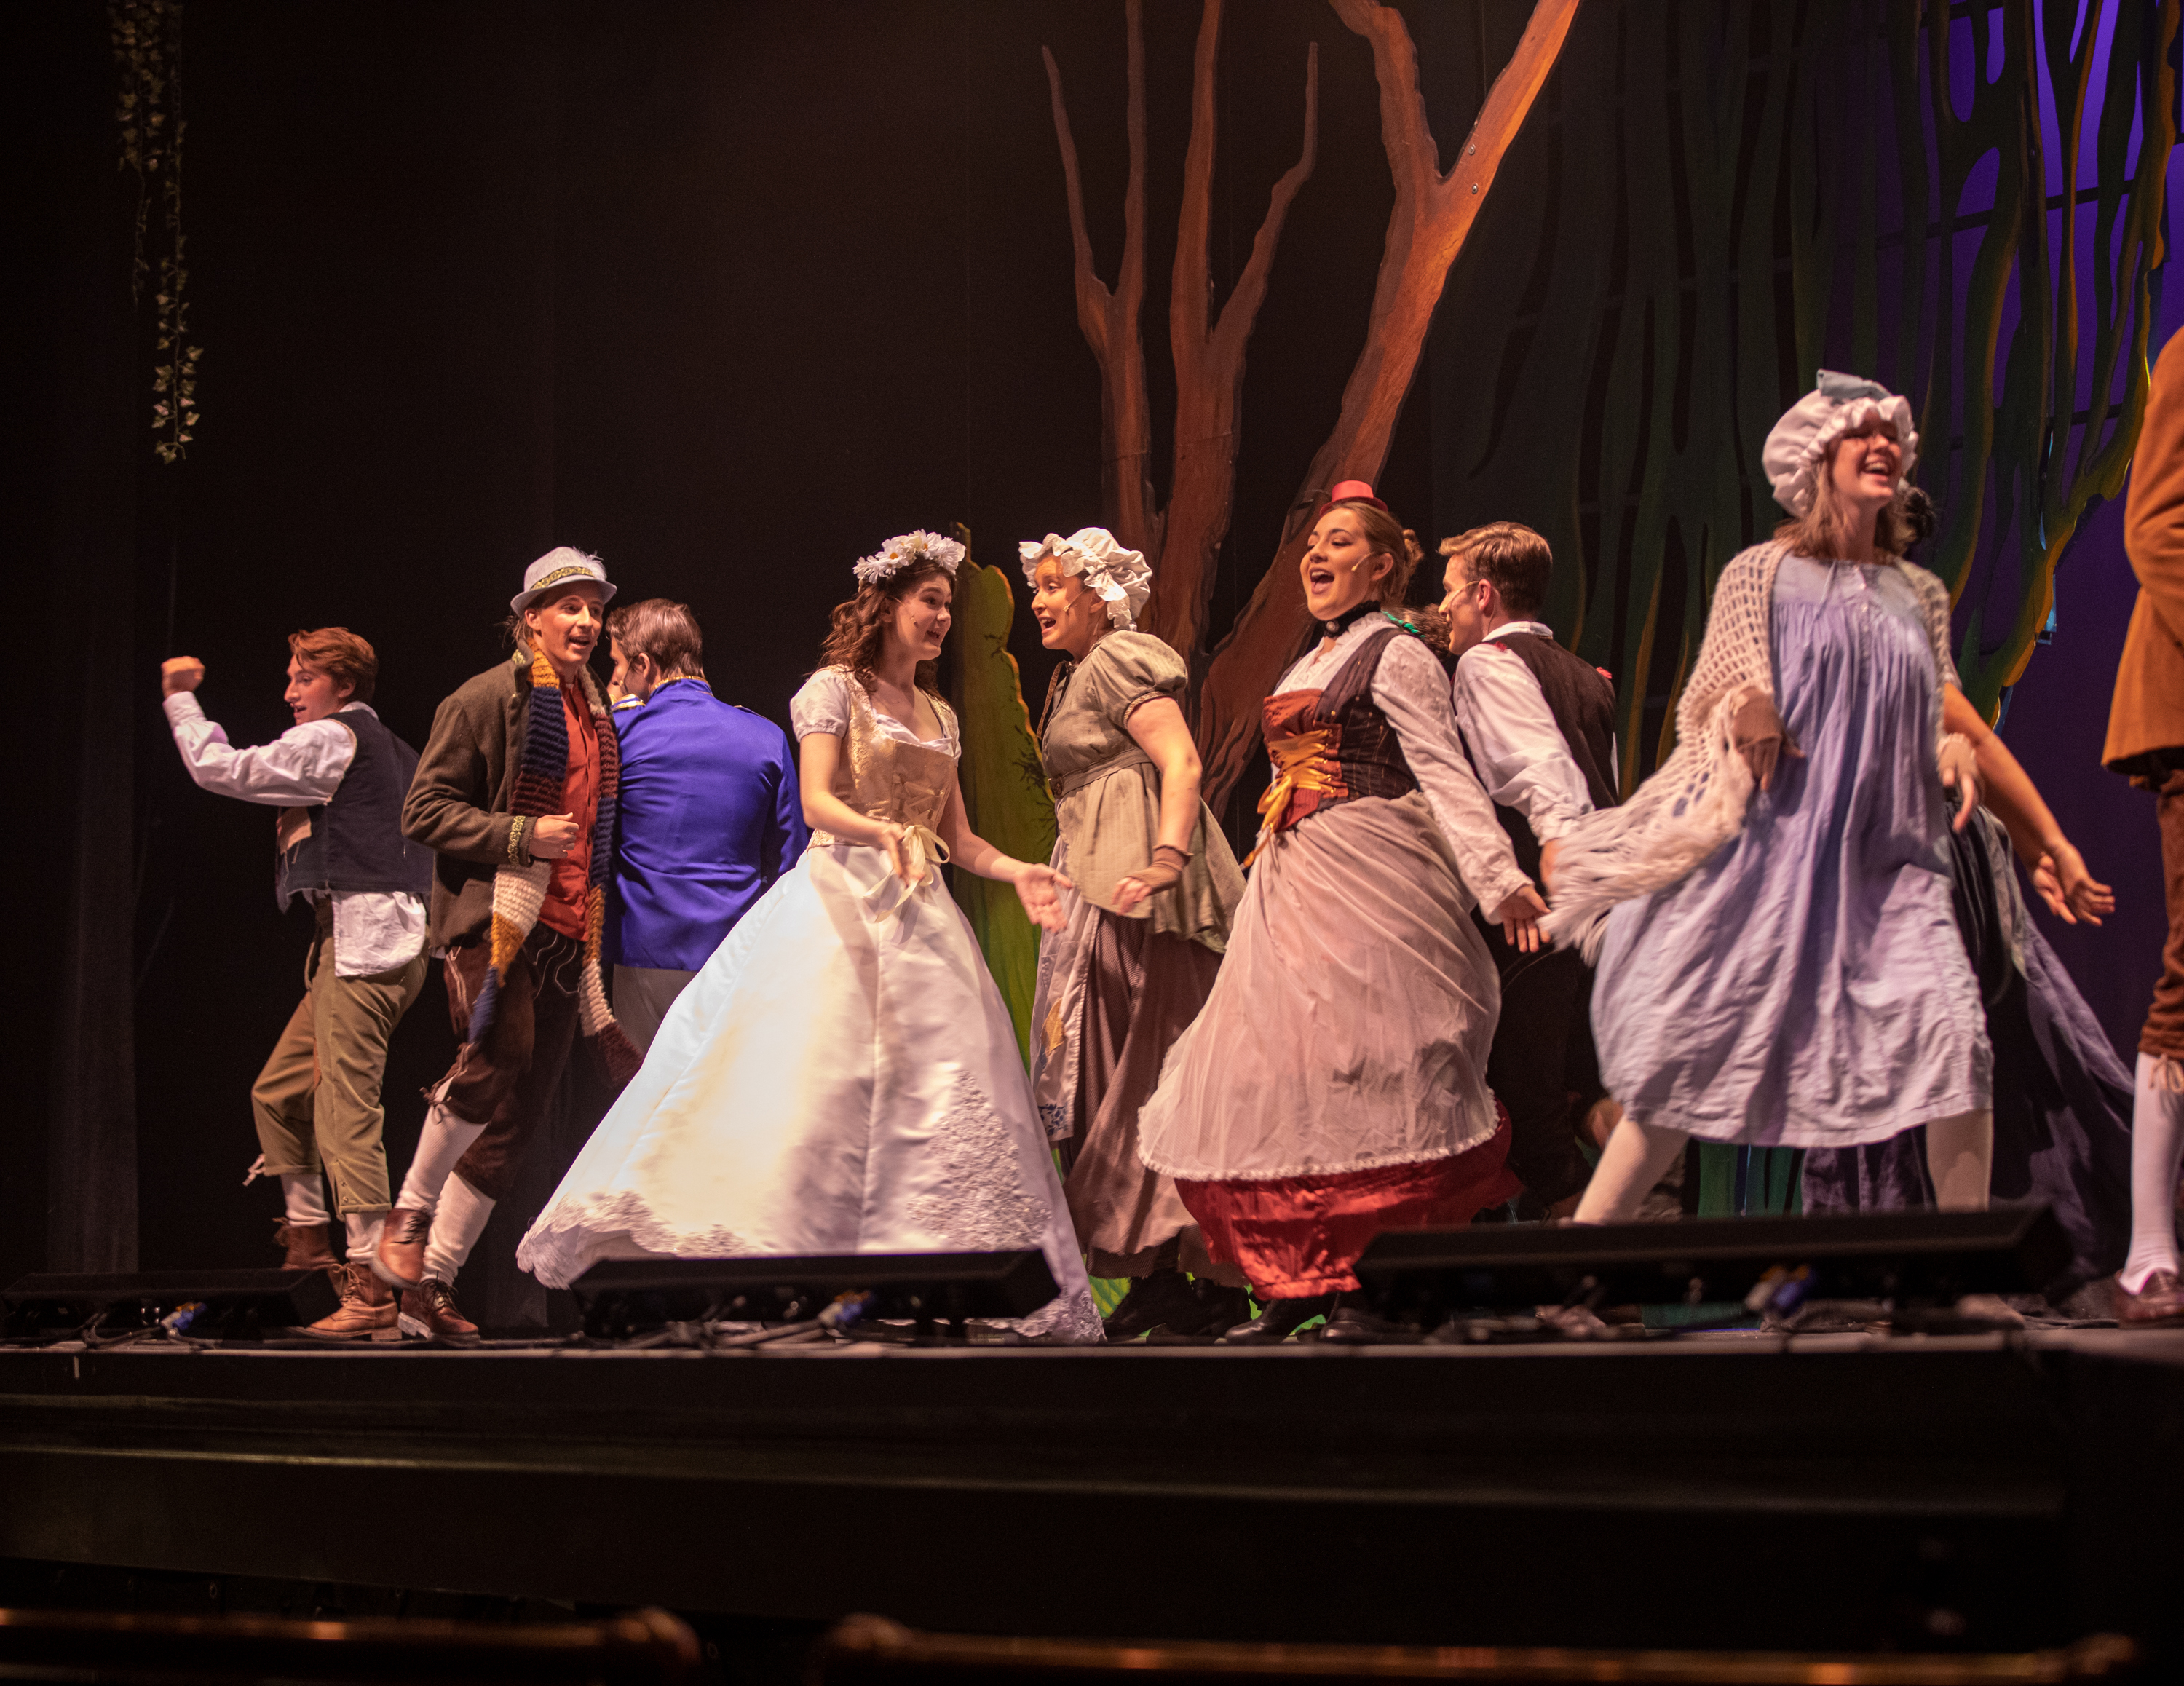 The cast of "Into the Woods" in the Act I Finale (Photo courtesy of Gettysburg College/Abbey Frisco)